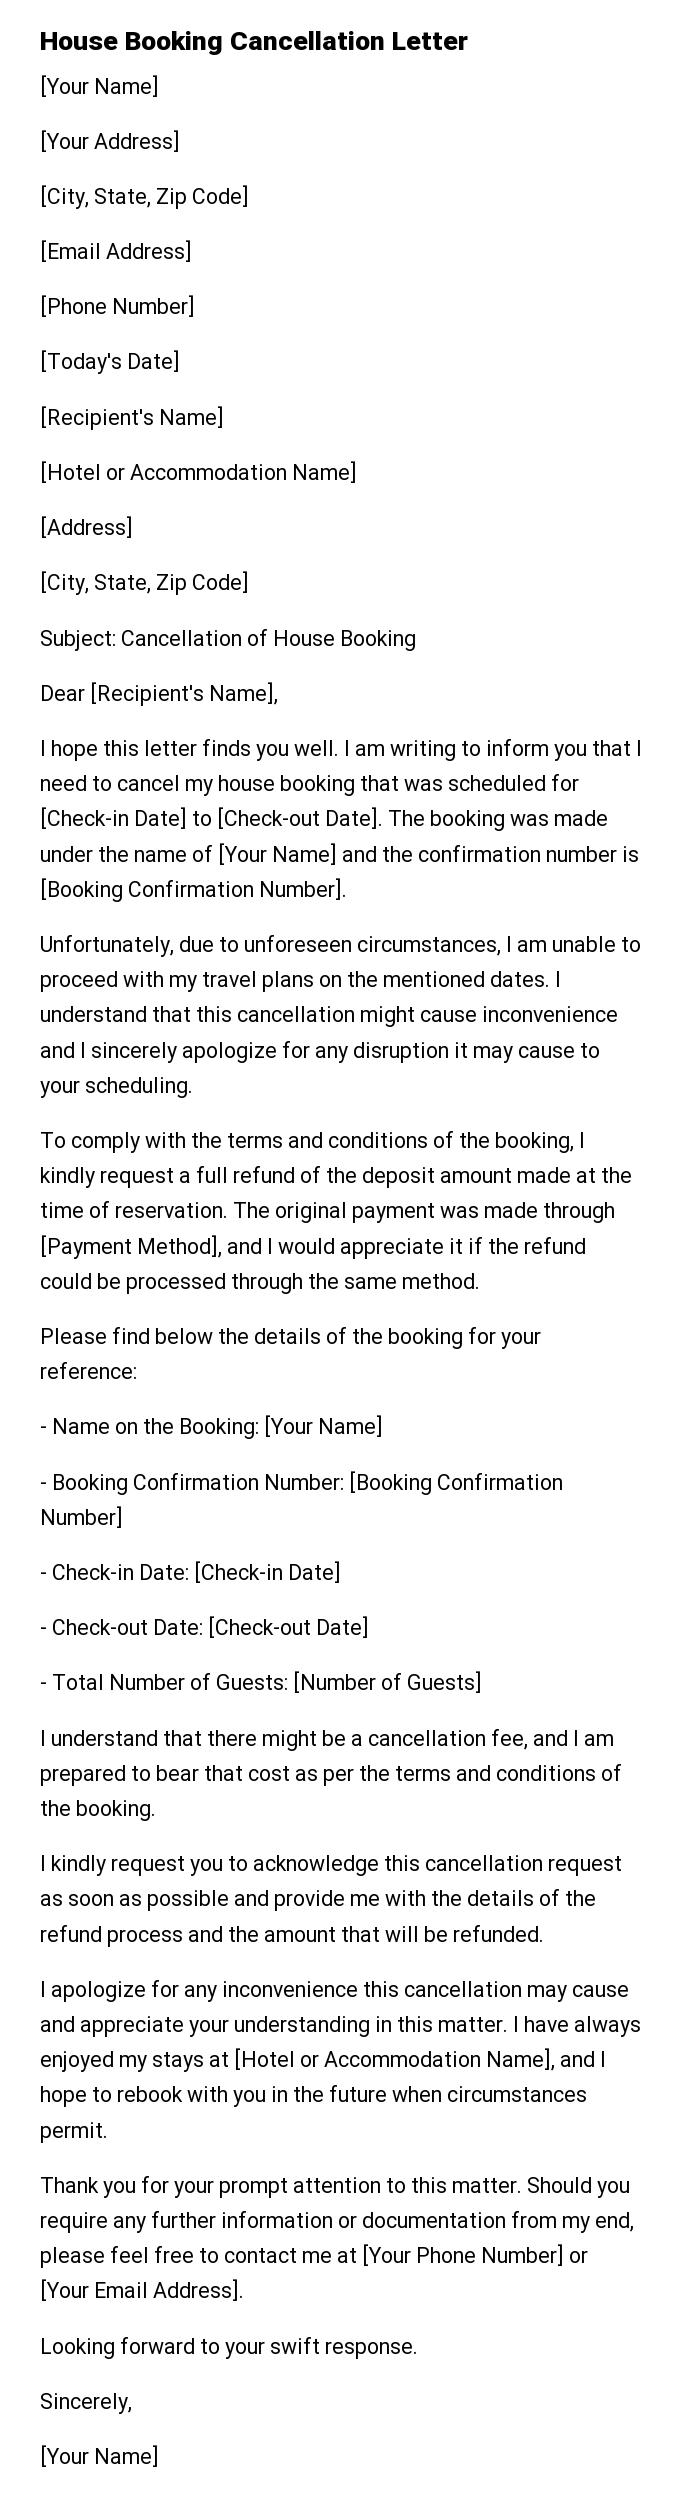 House Booking Cancellation Letter